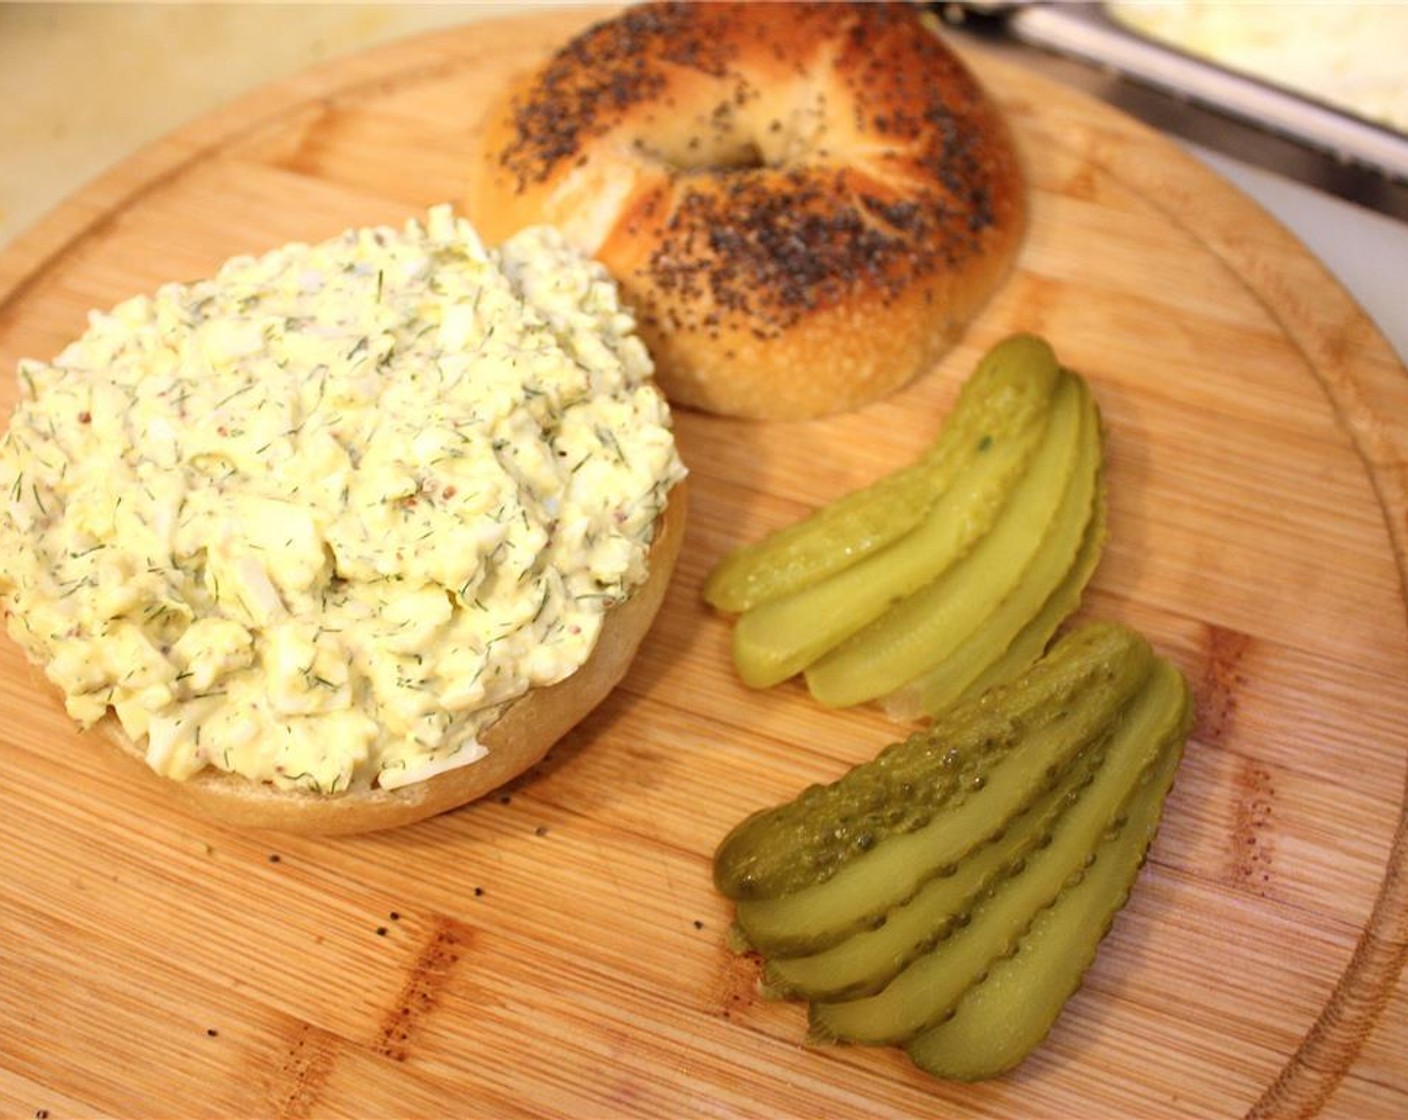 step 9 Spread the egg salad onto the open face of the bagel. Slice Pickles (2) and place on top of the egg salad.